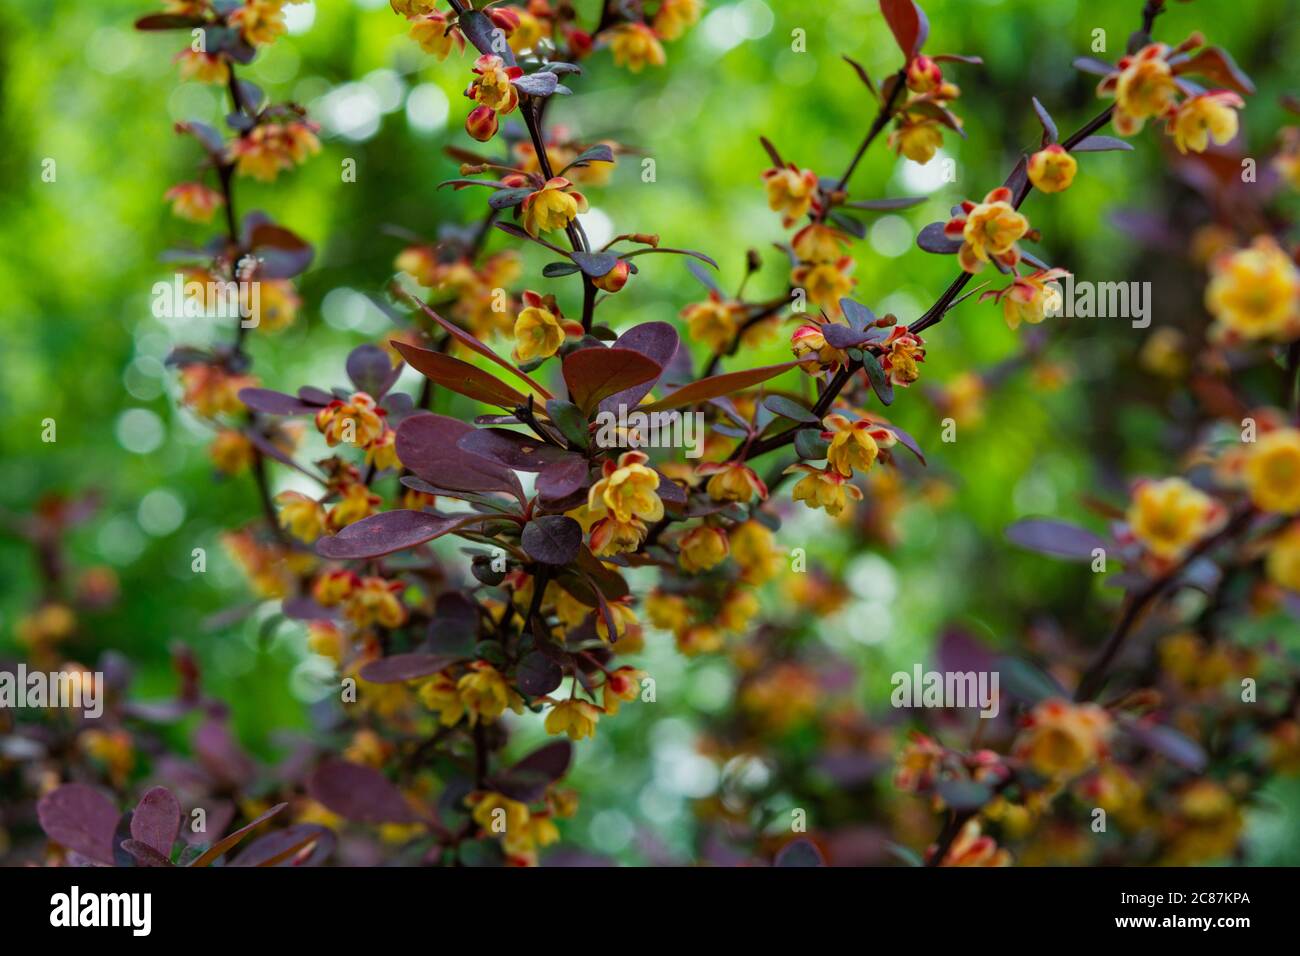 Beautiful blooming yellow flowers by bush with red purple leaves. Berberis ottawensis Auricoma shrub Stock Photo